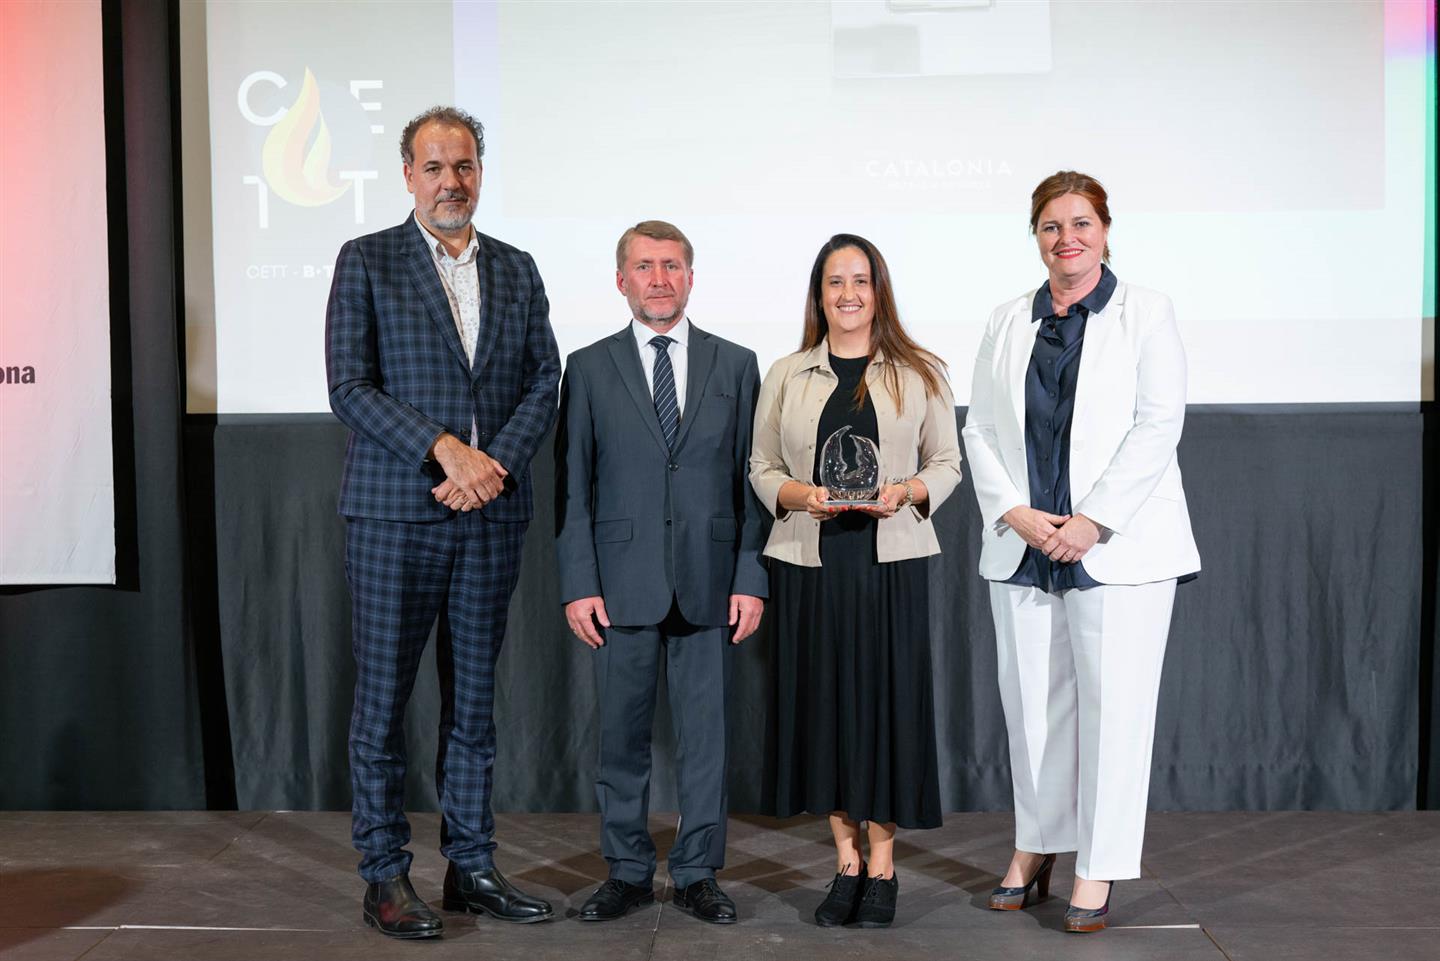 Photography from: Chef Carme Ruscalleda, the 3Cat program La Travessa, and the tourism company Grup Julià are among the honorees at the XXXIX edition of the CETT Alimara Awards. | CETT